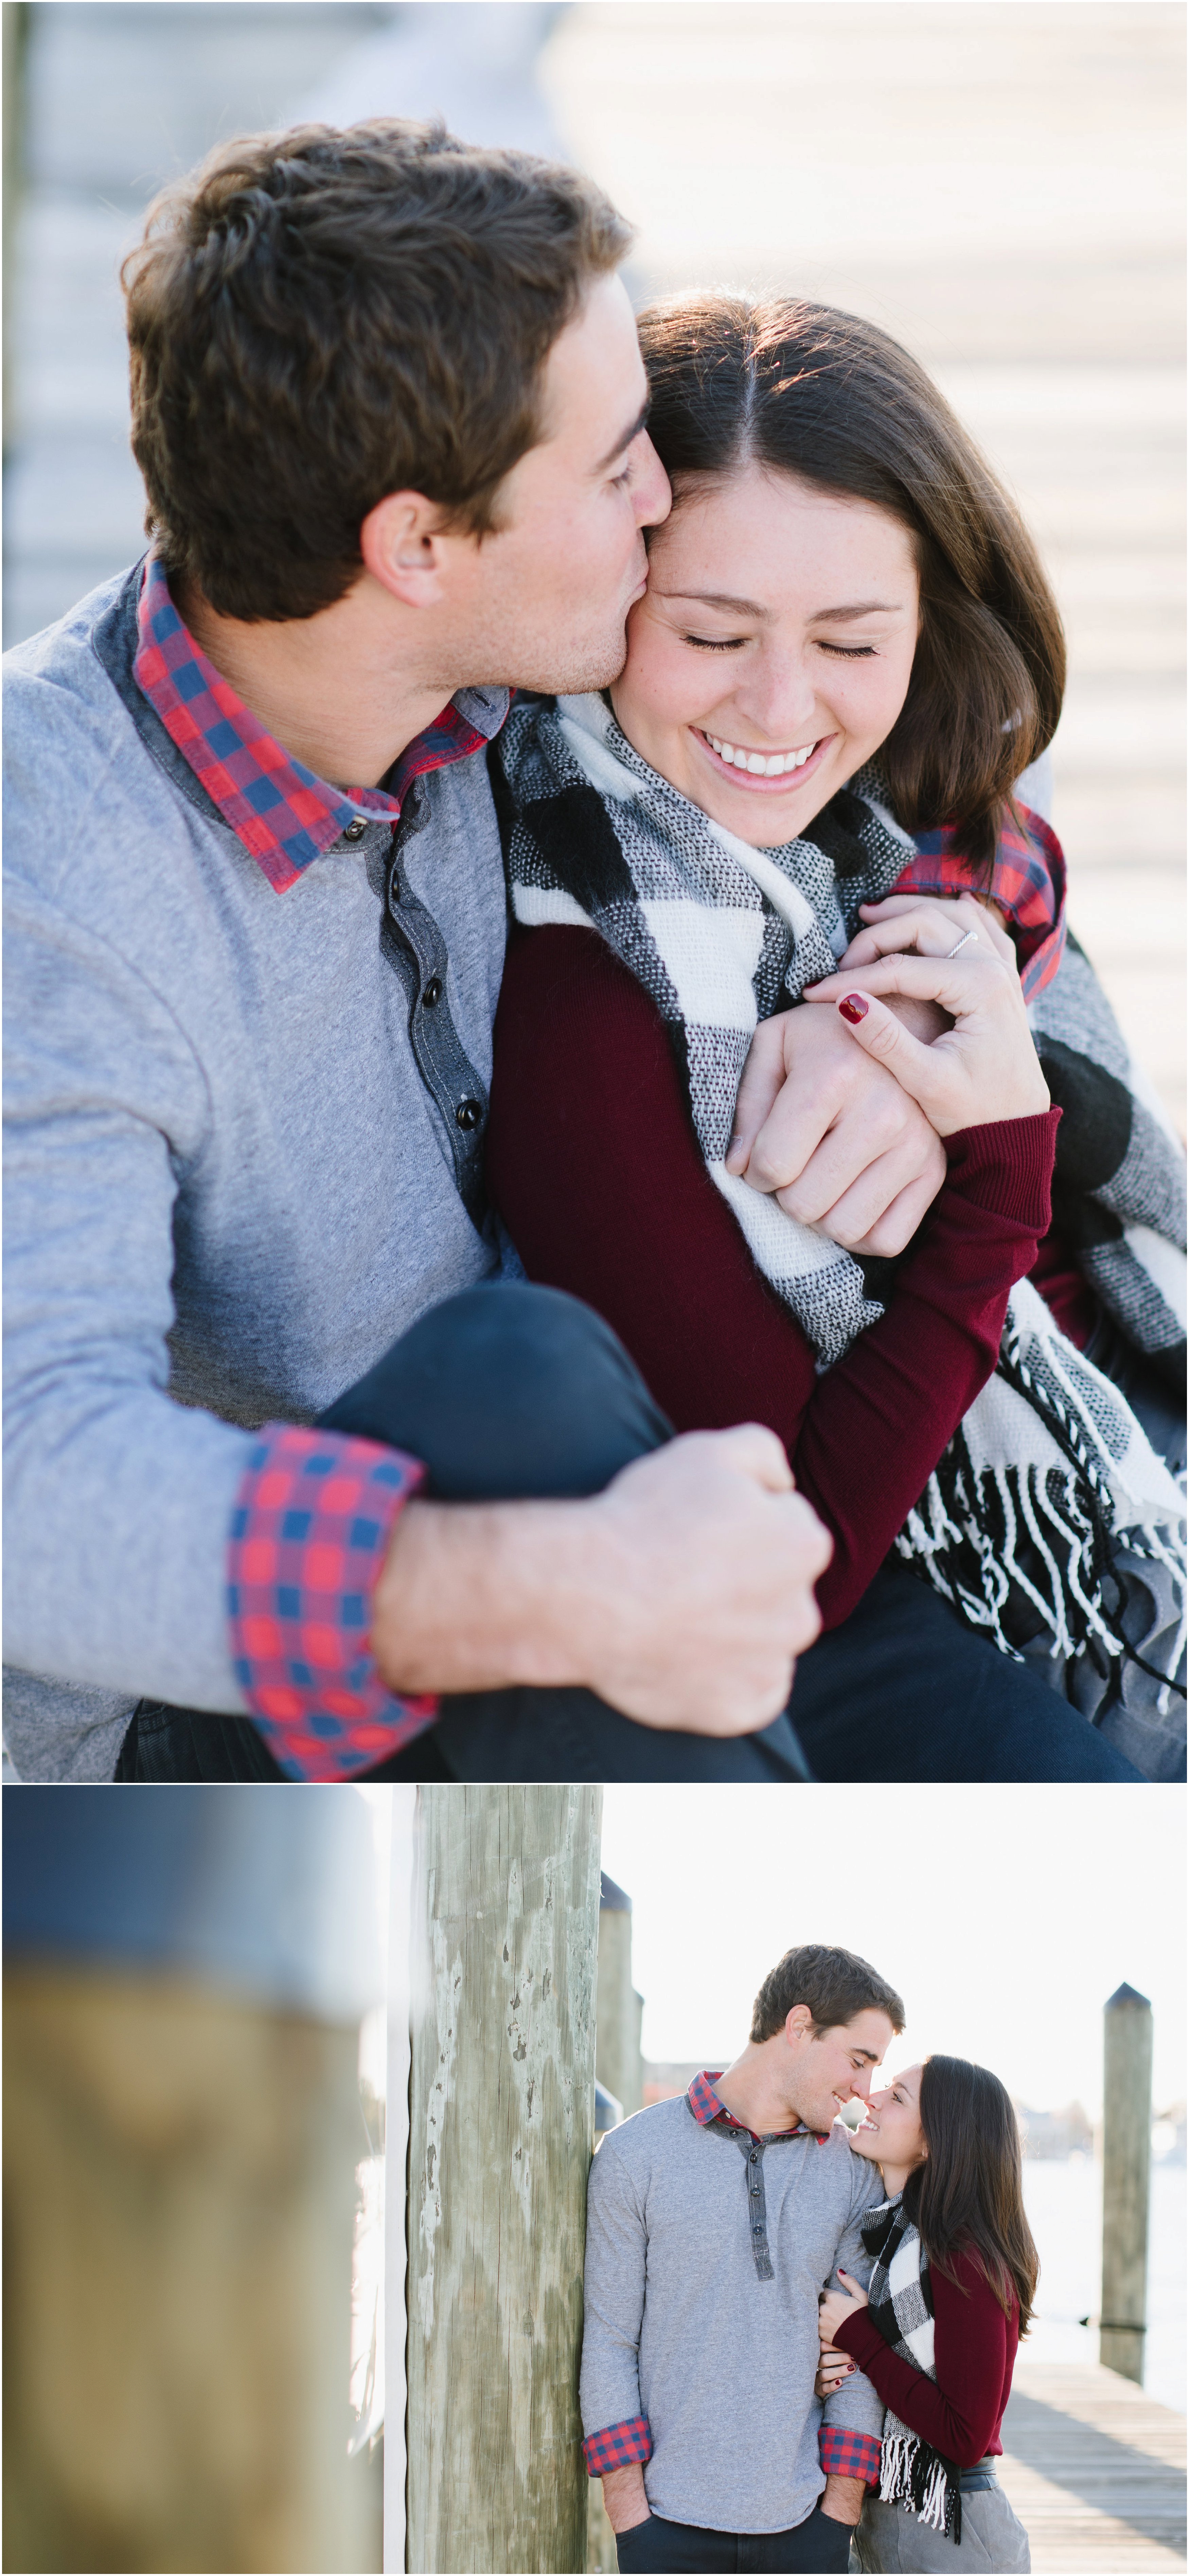 View More: http://nataliefranke.pass.us/becca-pat-engagement